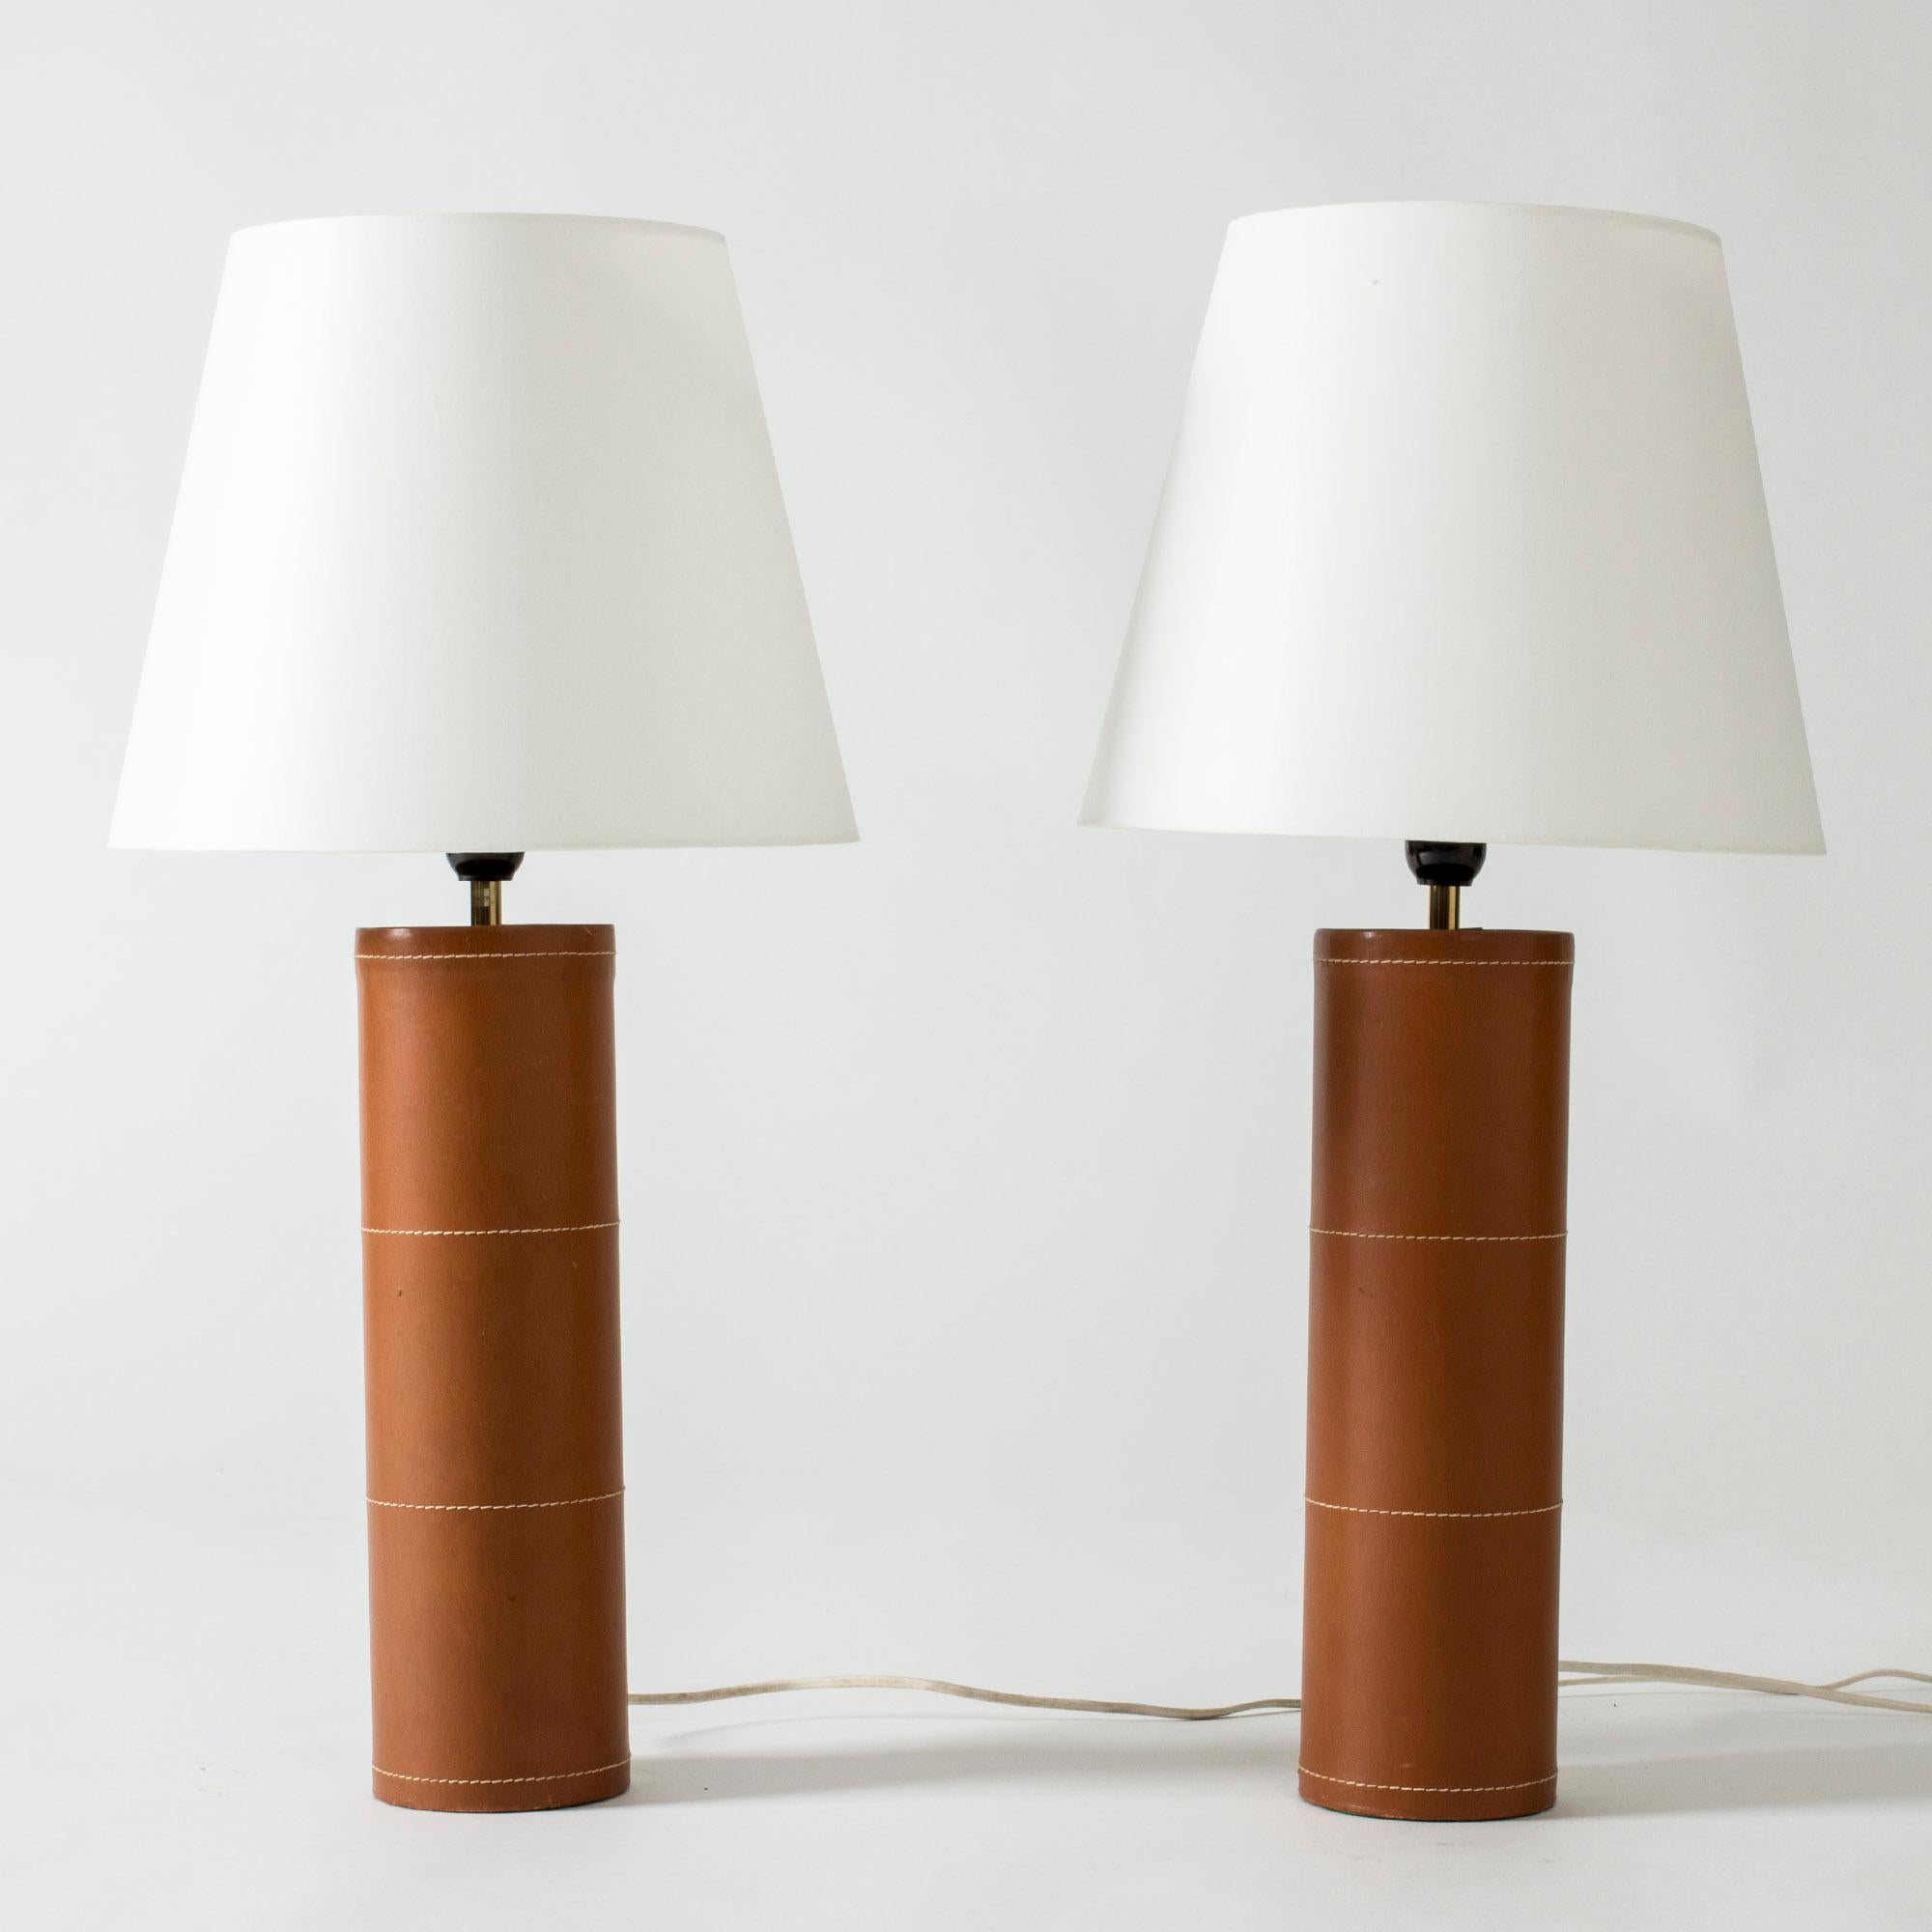 Pair of large table lamps from Bergboms with cylinder bases dressed in cognac leather. Decorated with white seams – a minimalist design with a deluxe finish.